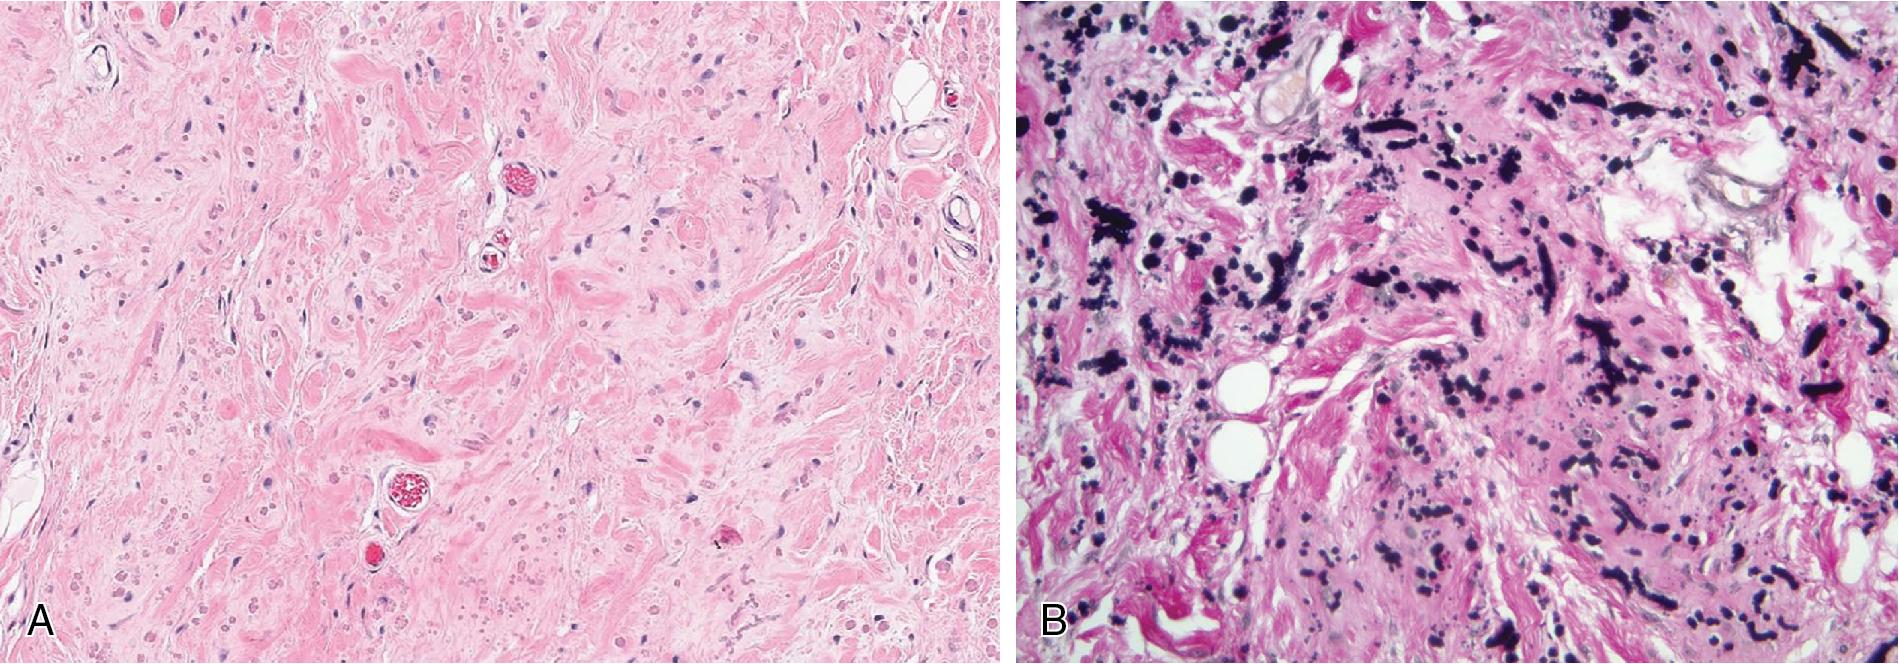 Fig. 8.20, Elastofibroma is an ill-defined mass, with variable amount of adipose and fibromyxoid tissue accompanied by increased abnormal and dystrophic elastic fibers (A) , highlighted by Elastin stain (B) .